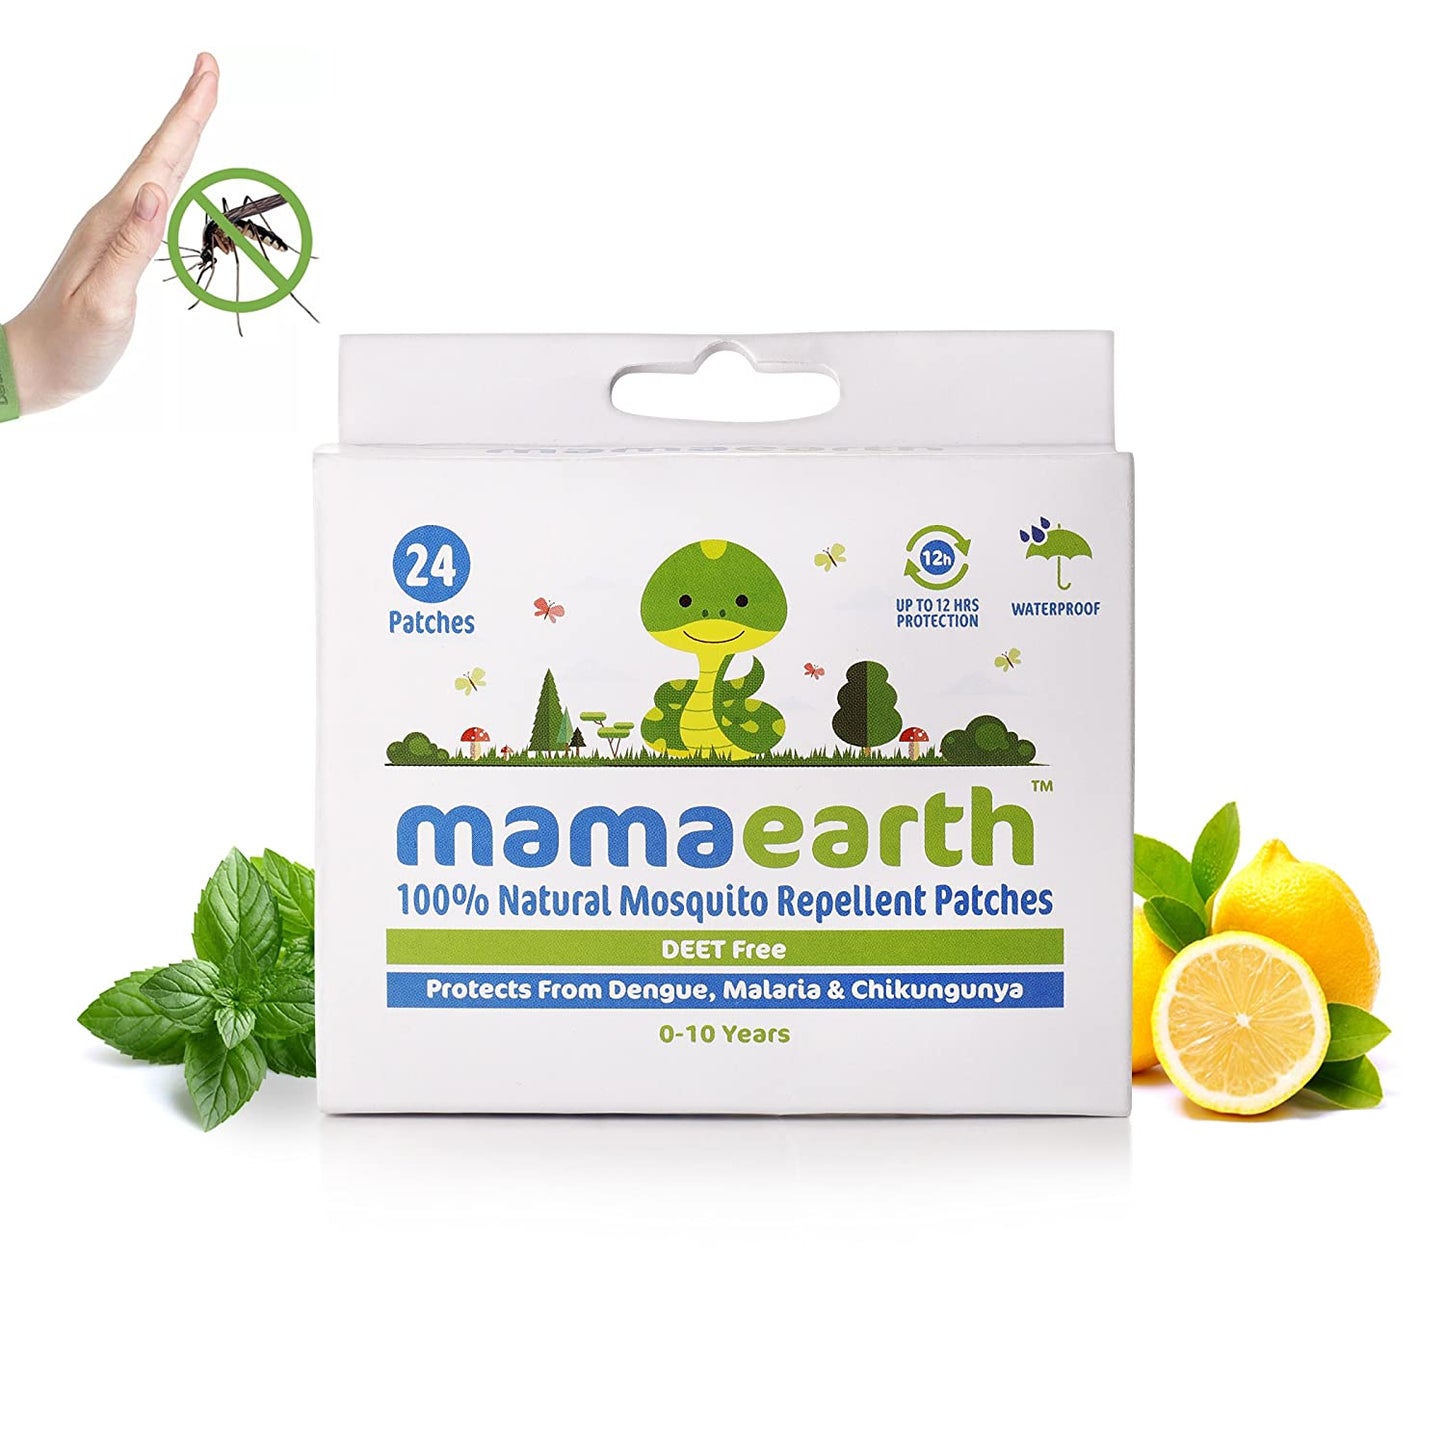 Mamaearth Natural Mosquito Repellent Patches - 24pcs